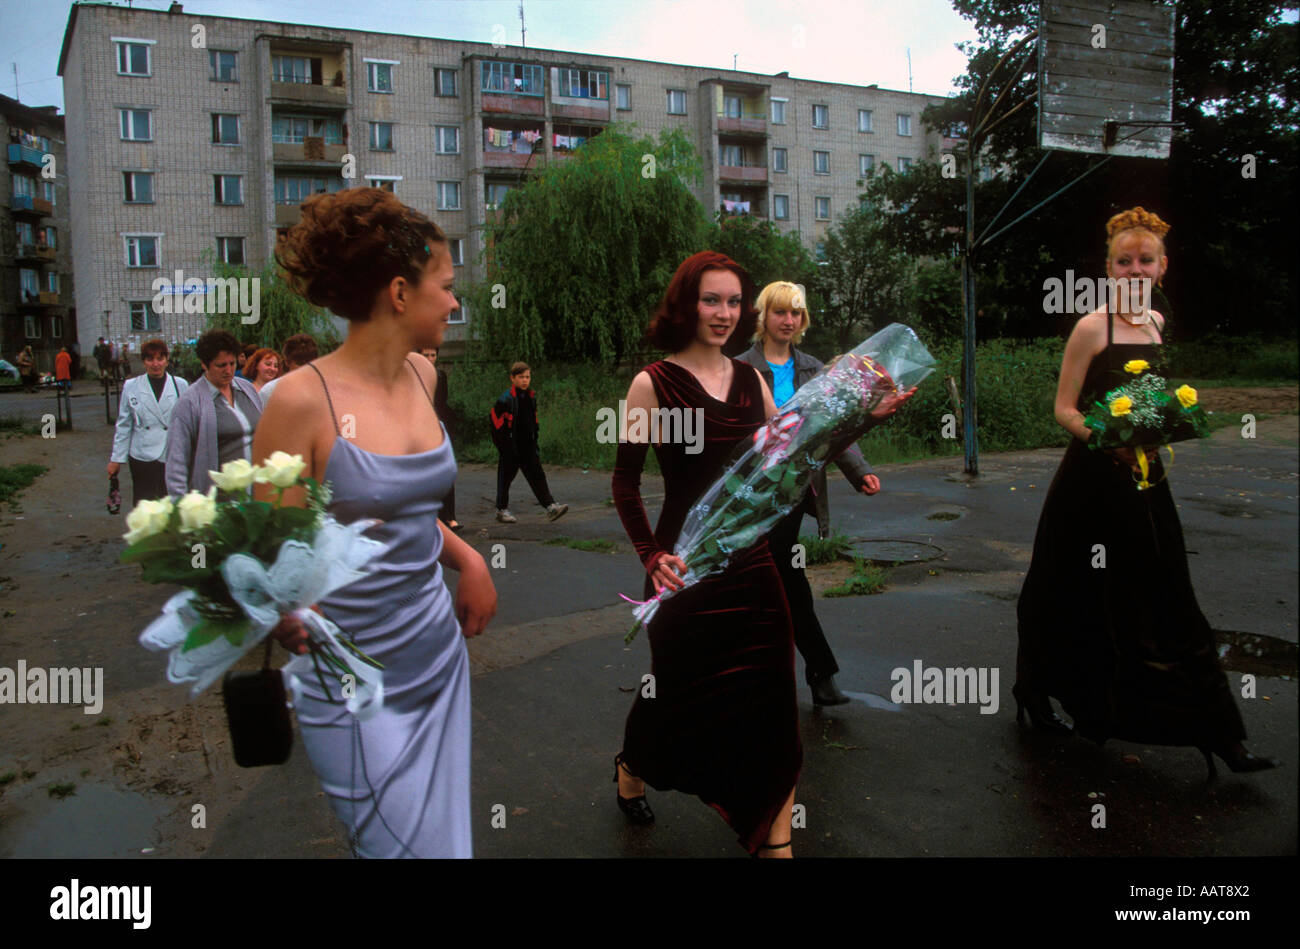 School leavers on the way to their high school graduation ceremony in the town square of Gvardeisk Kaliningrad Stock Photo